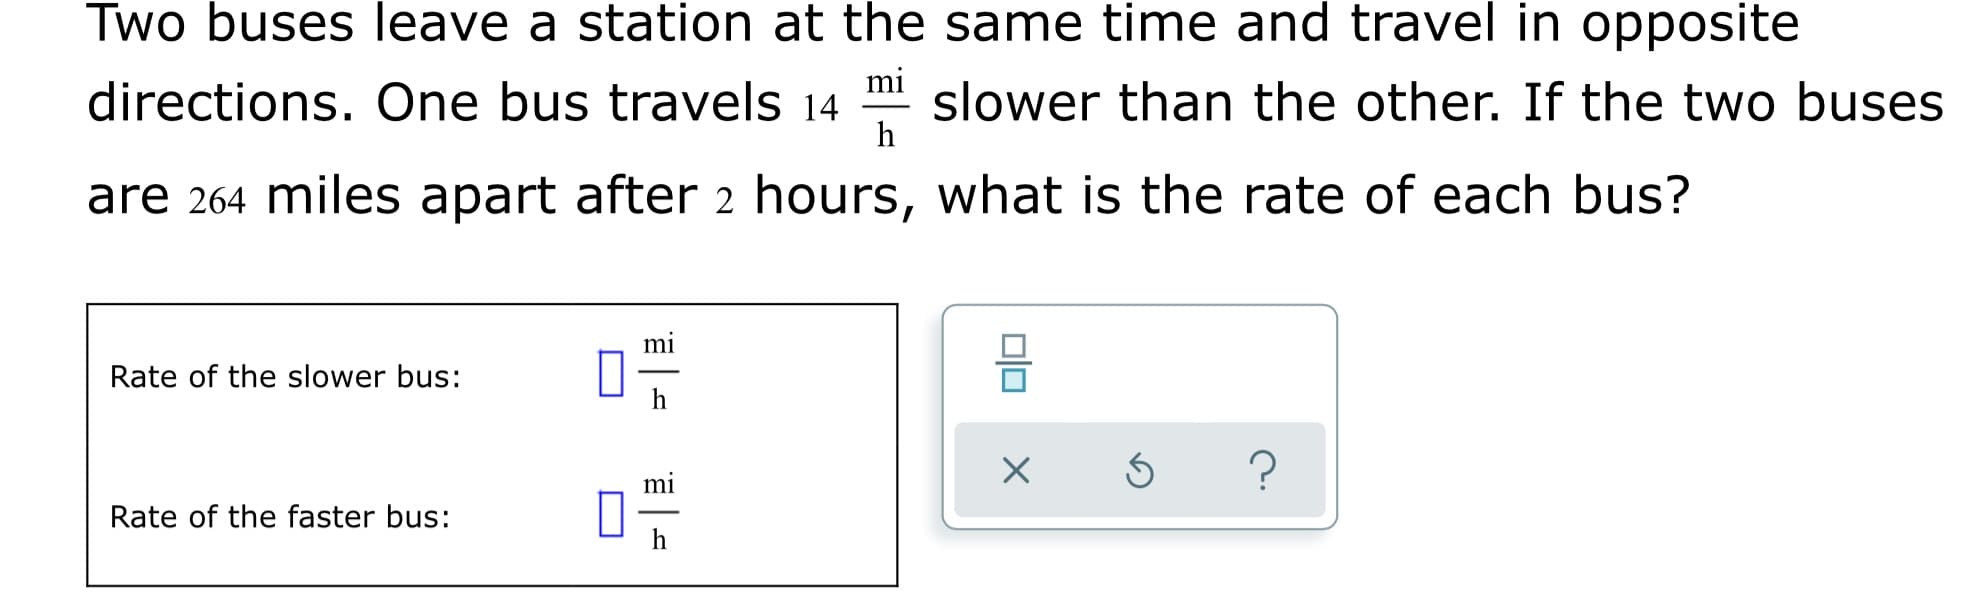 Two buses leave a station at the same time and travel in opposite
directions. One bus travels 14 m slower than the other. If the two buses
h
are 264 miles apart after 2 hours, what is the rate of each bus?
mi
Rate of the slower bus:
mi
Rate of the faster bus:
